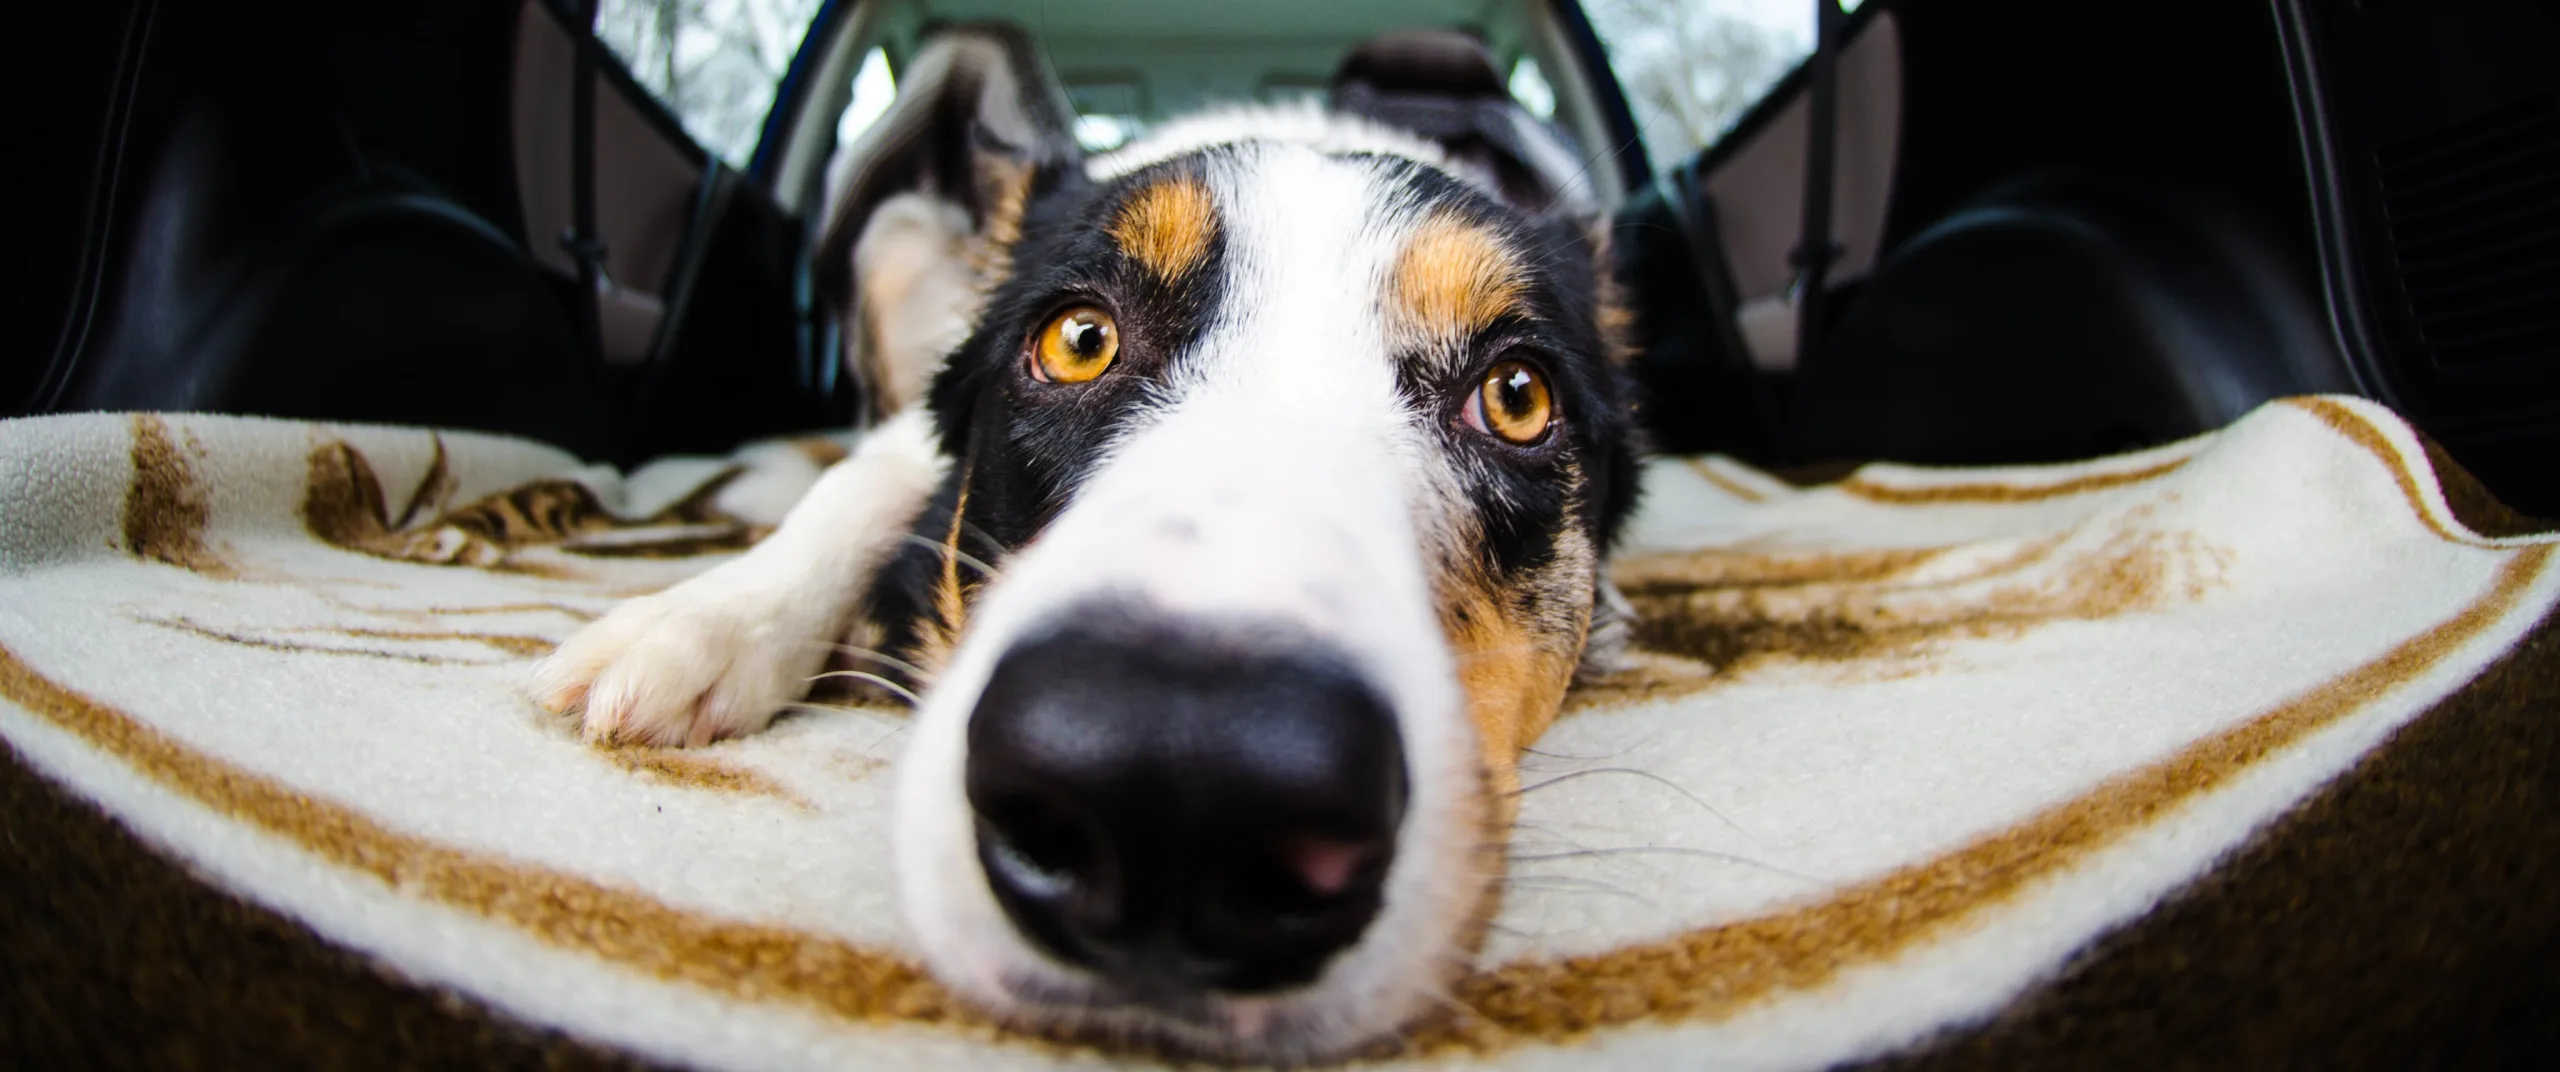 The dos and don’ts of driving with your dog 